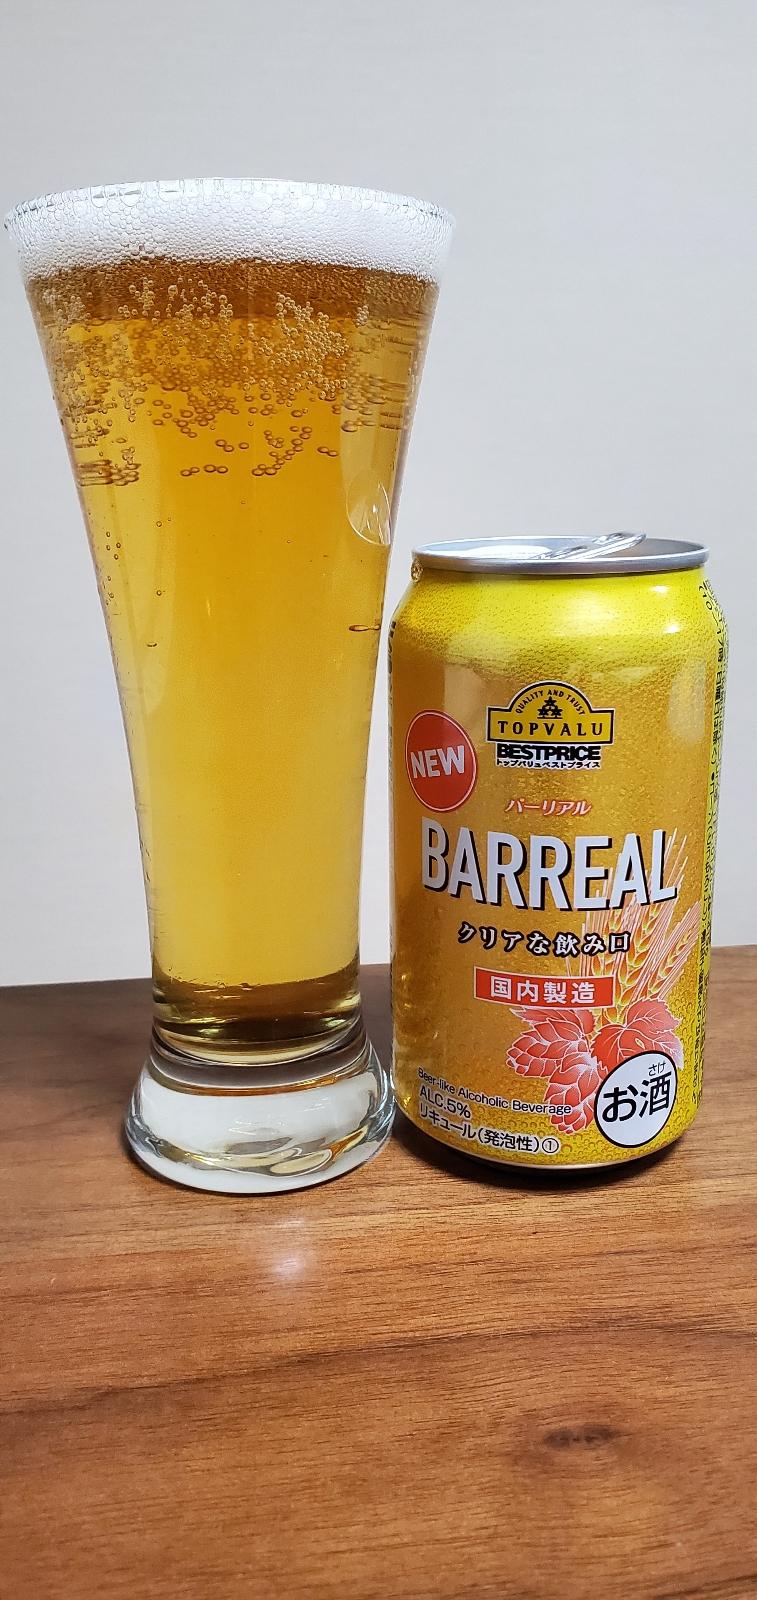 Top Value Barreal Clear